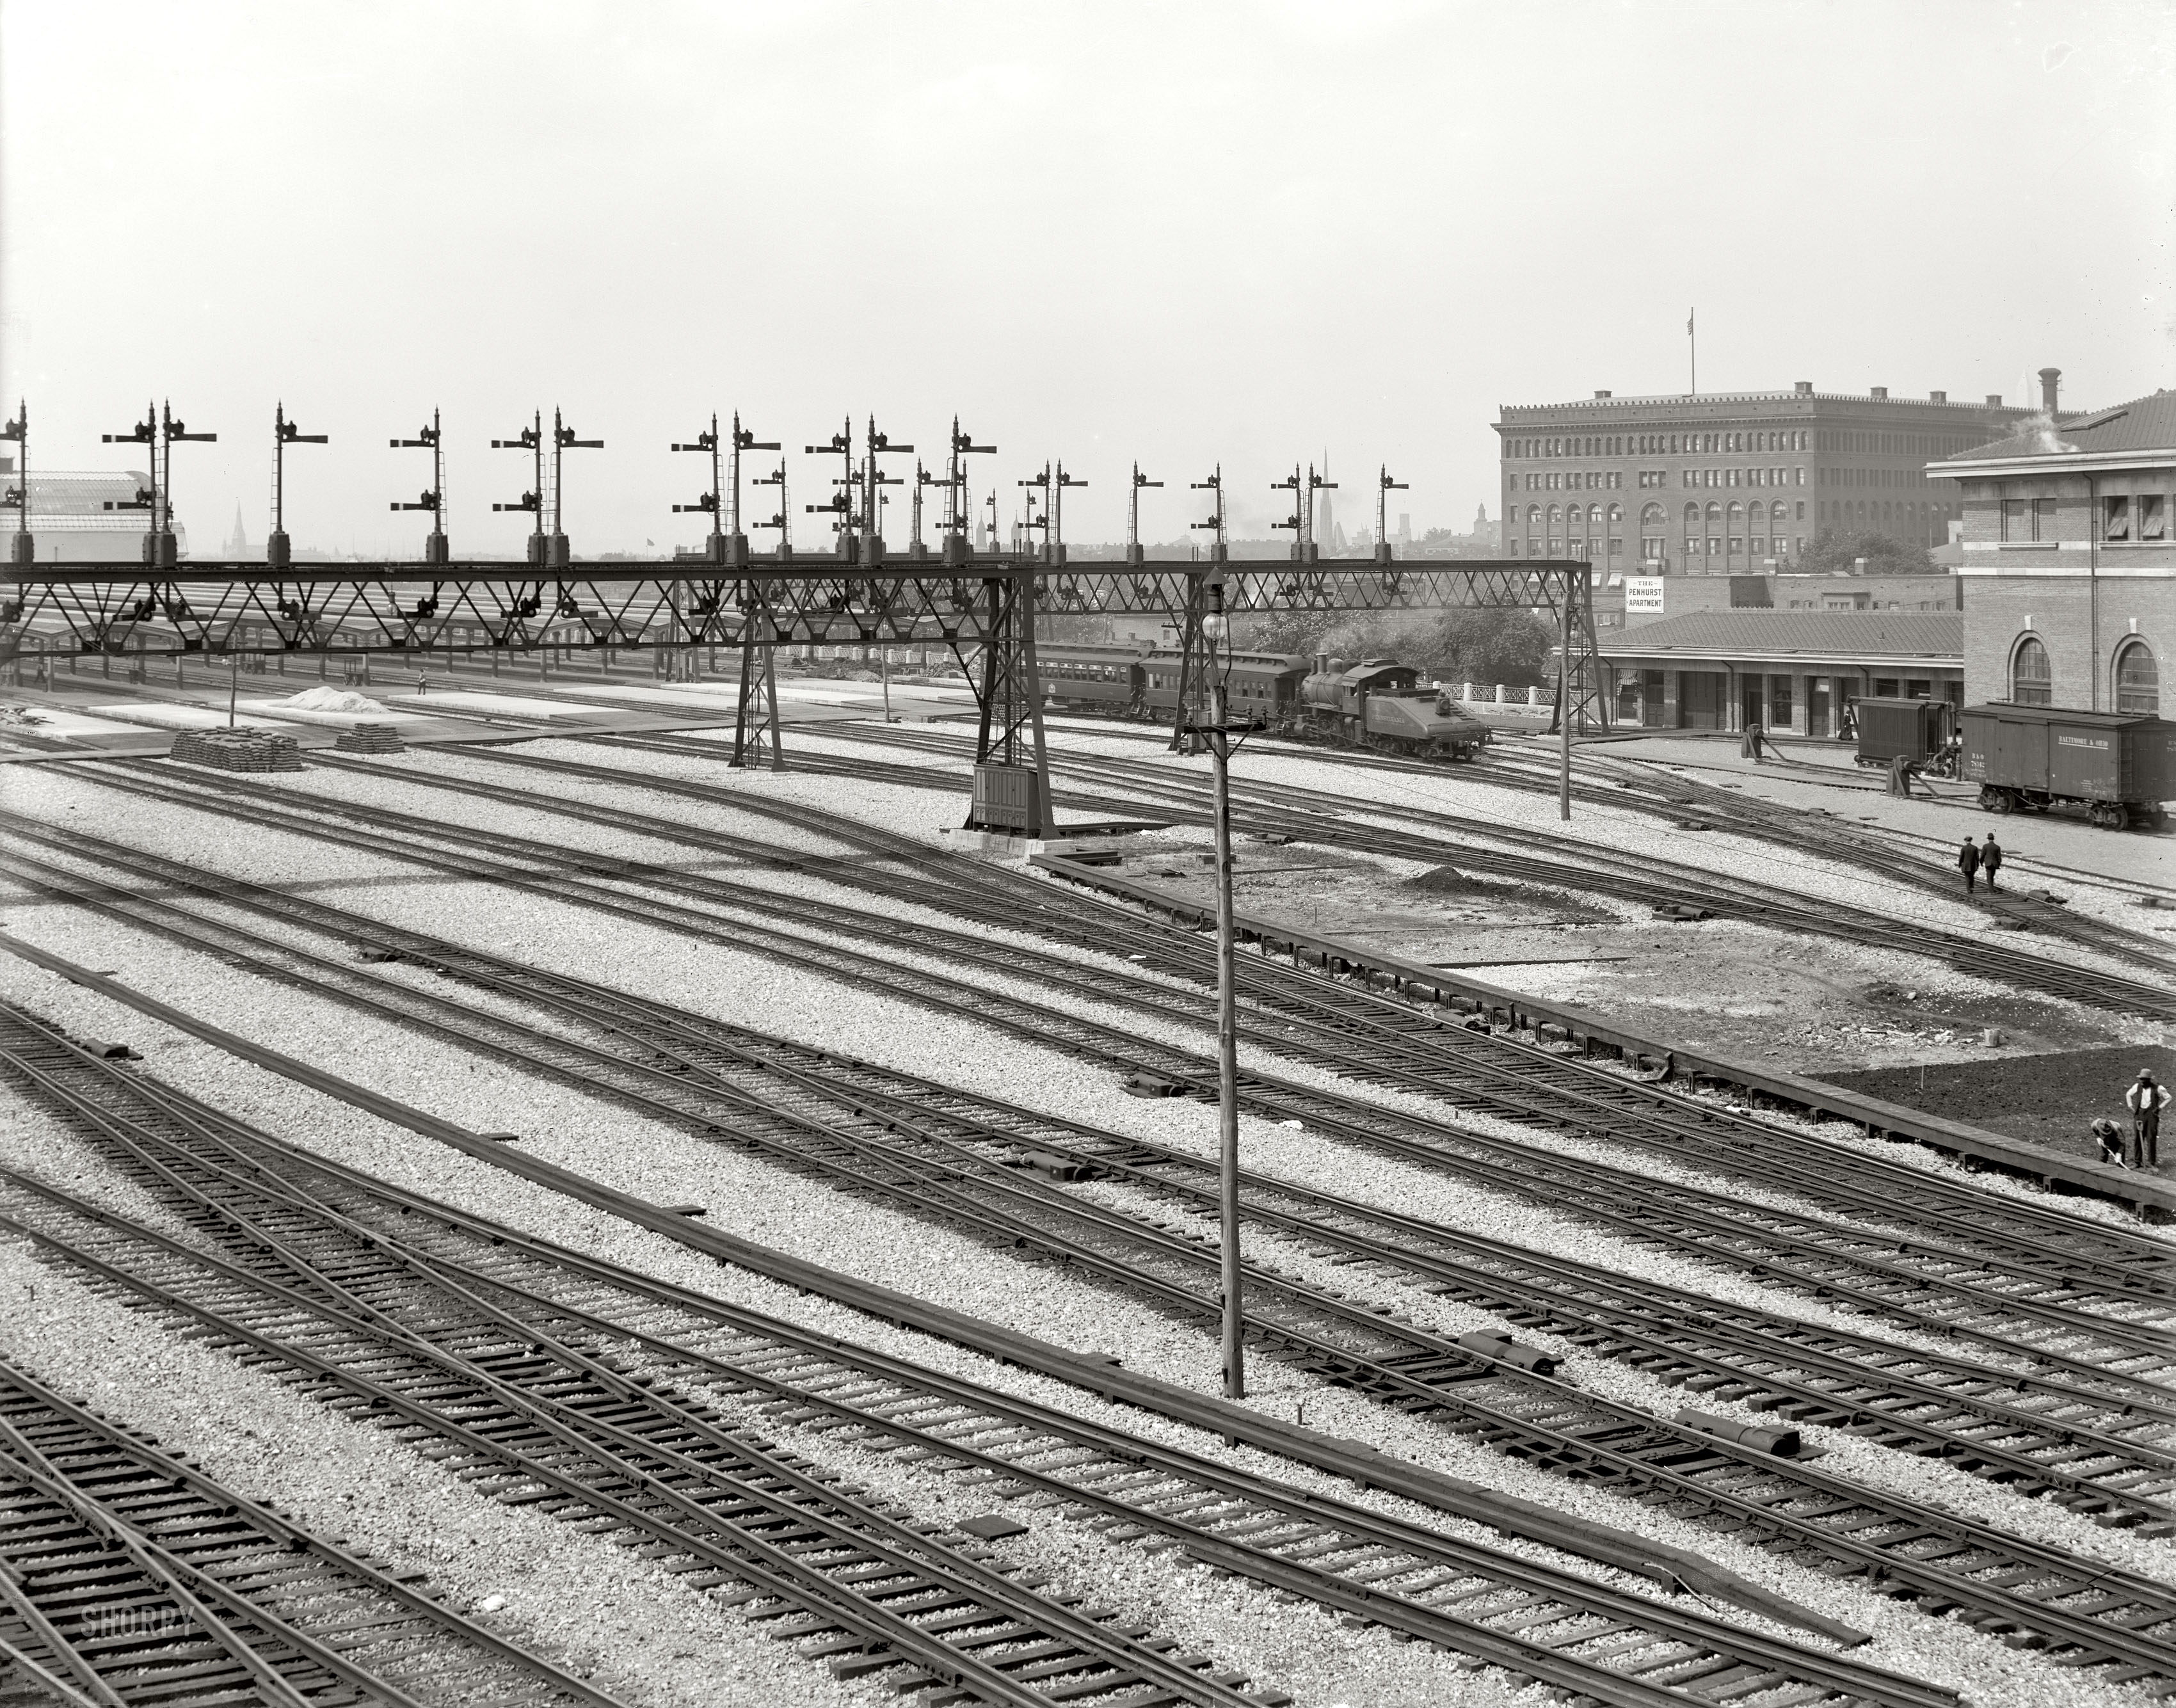 Washington, D.C., circa 1906-1910. "Switch yards, Union Station." The third and final part of our panorama. Detroit Publishing glass negative. View full size.